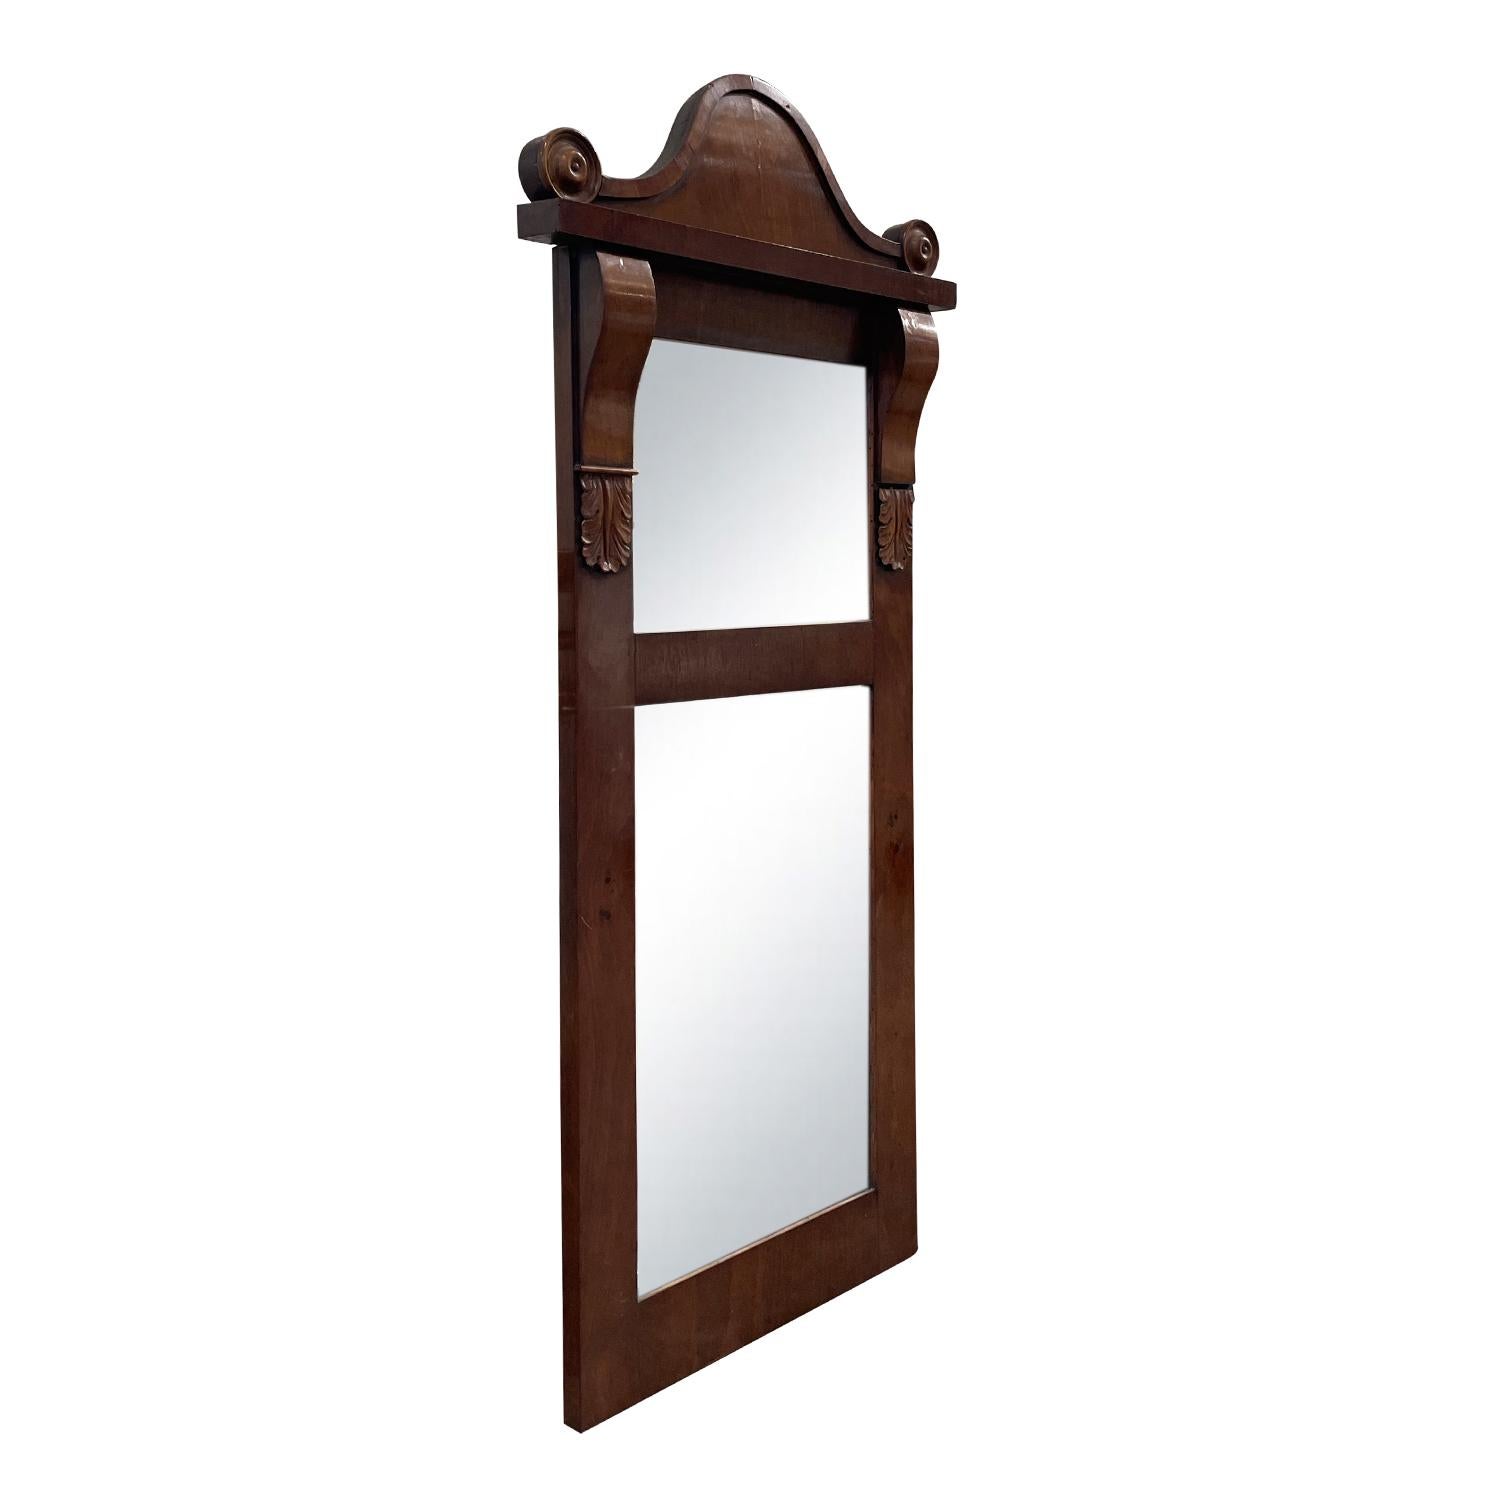 Hand-Crafted 19th Century Baltic Polished Mahogany Wall Glass Mirror - Antique Décor For Sale